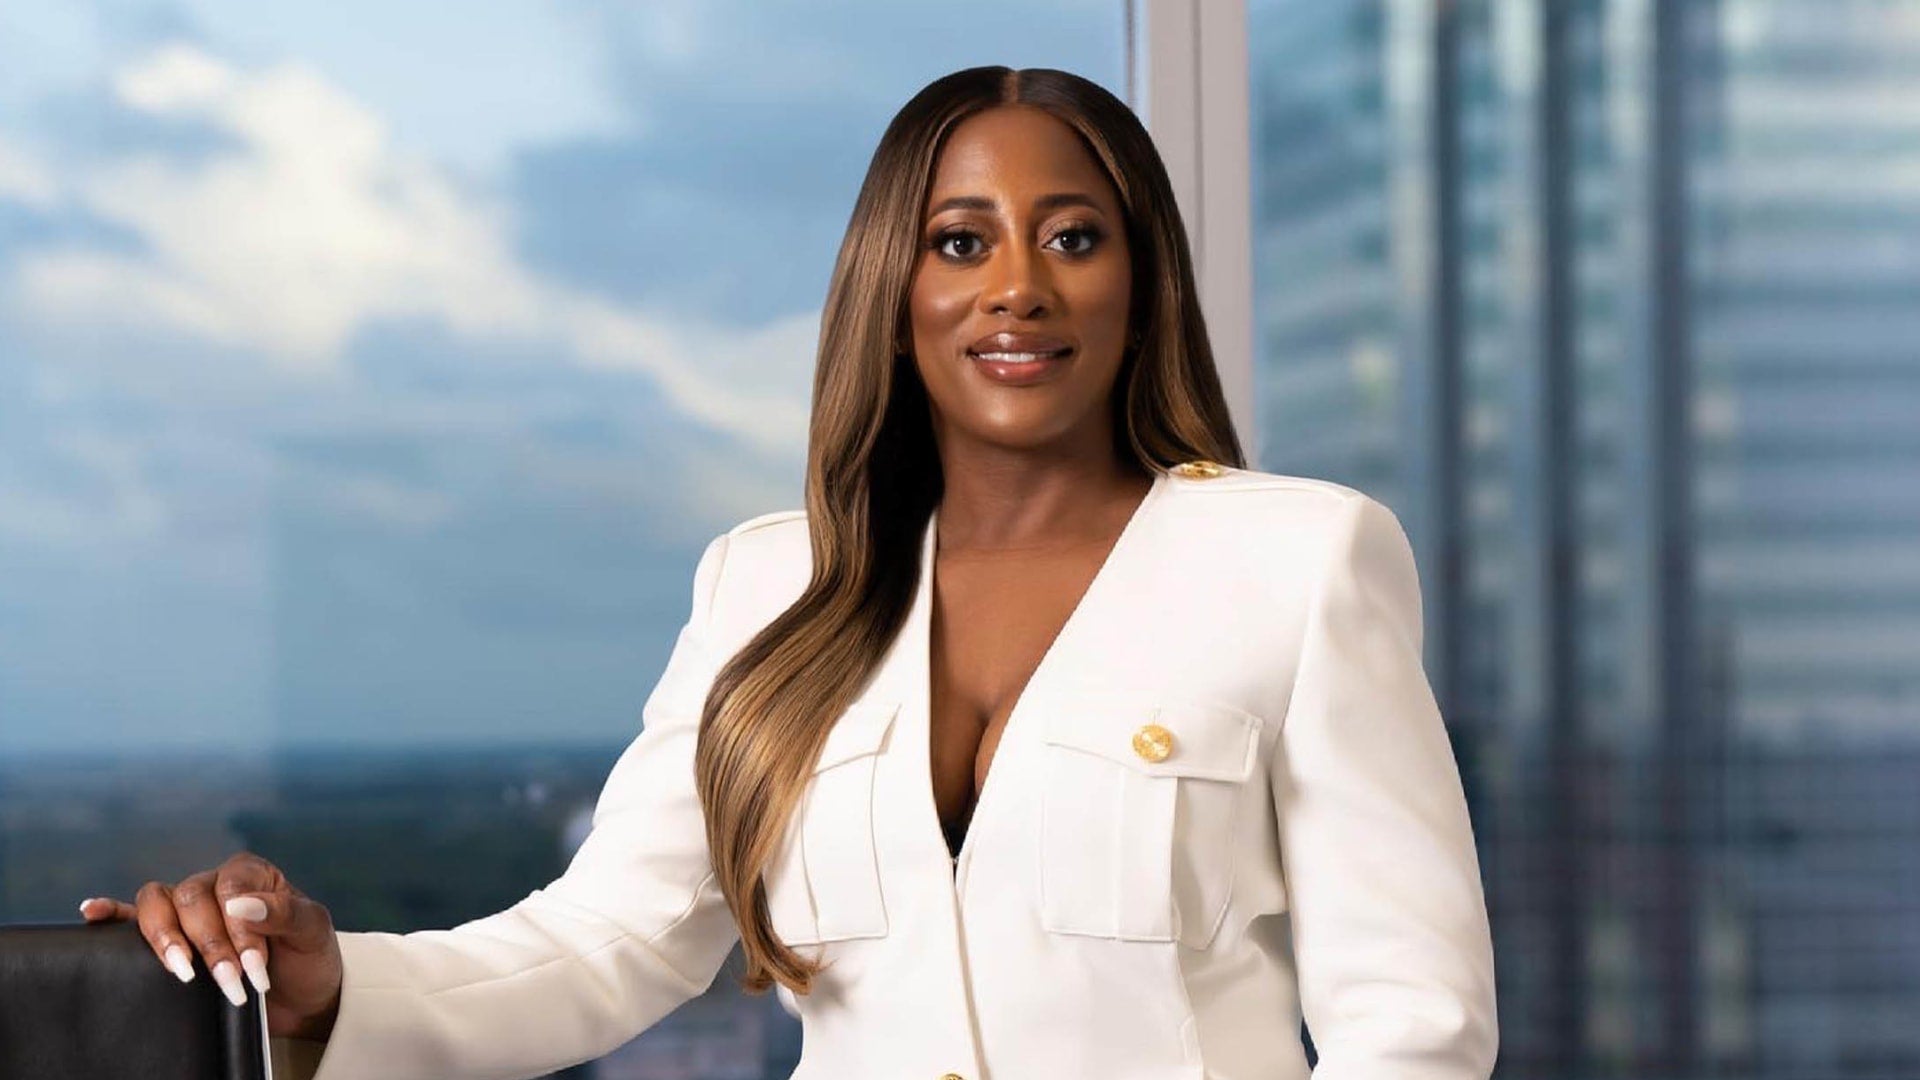 This Beauty Entrepreneur Developed A Tech-Driven Wig Service That Naomi Campbell And Taraji P. Henson Swear By